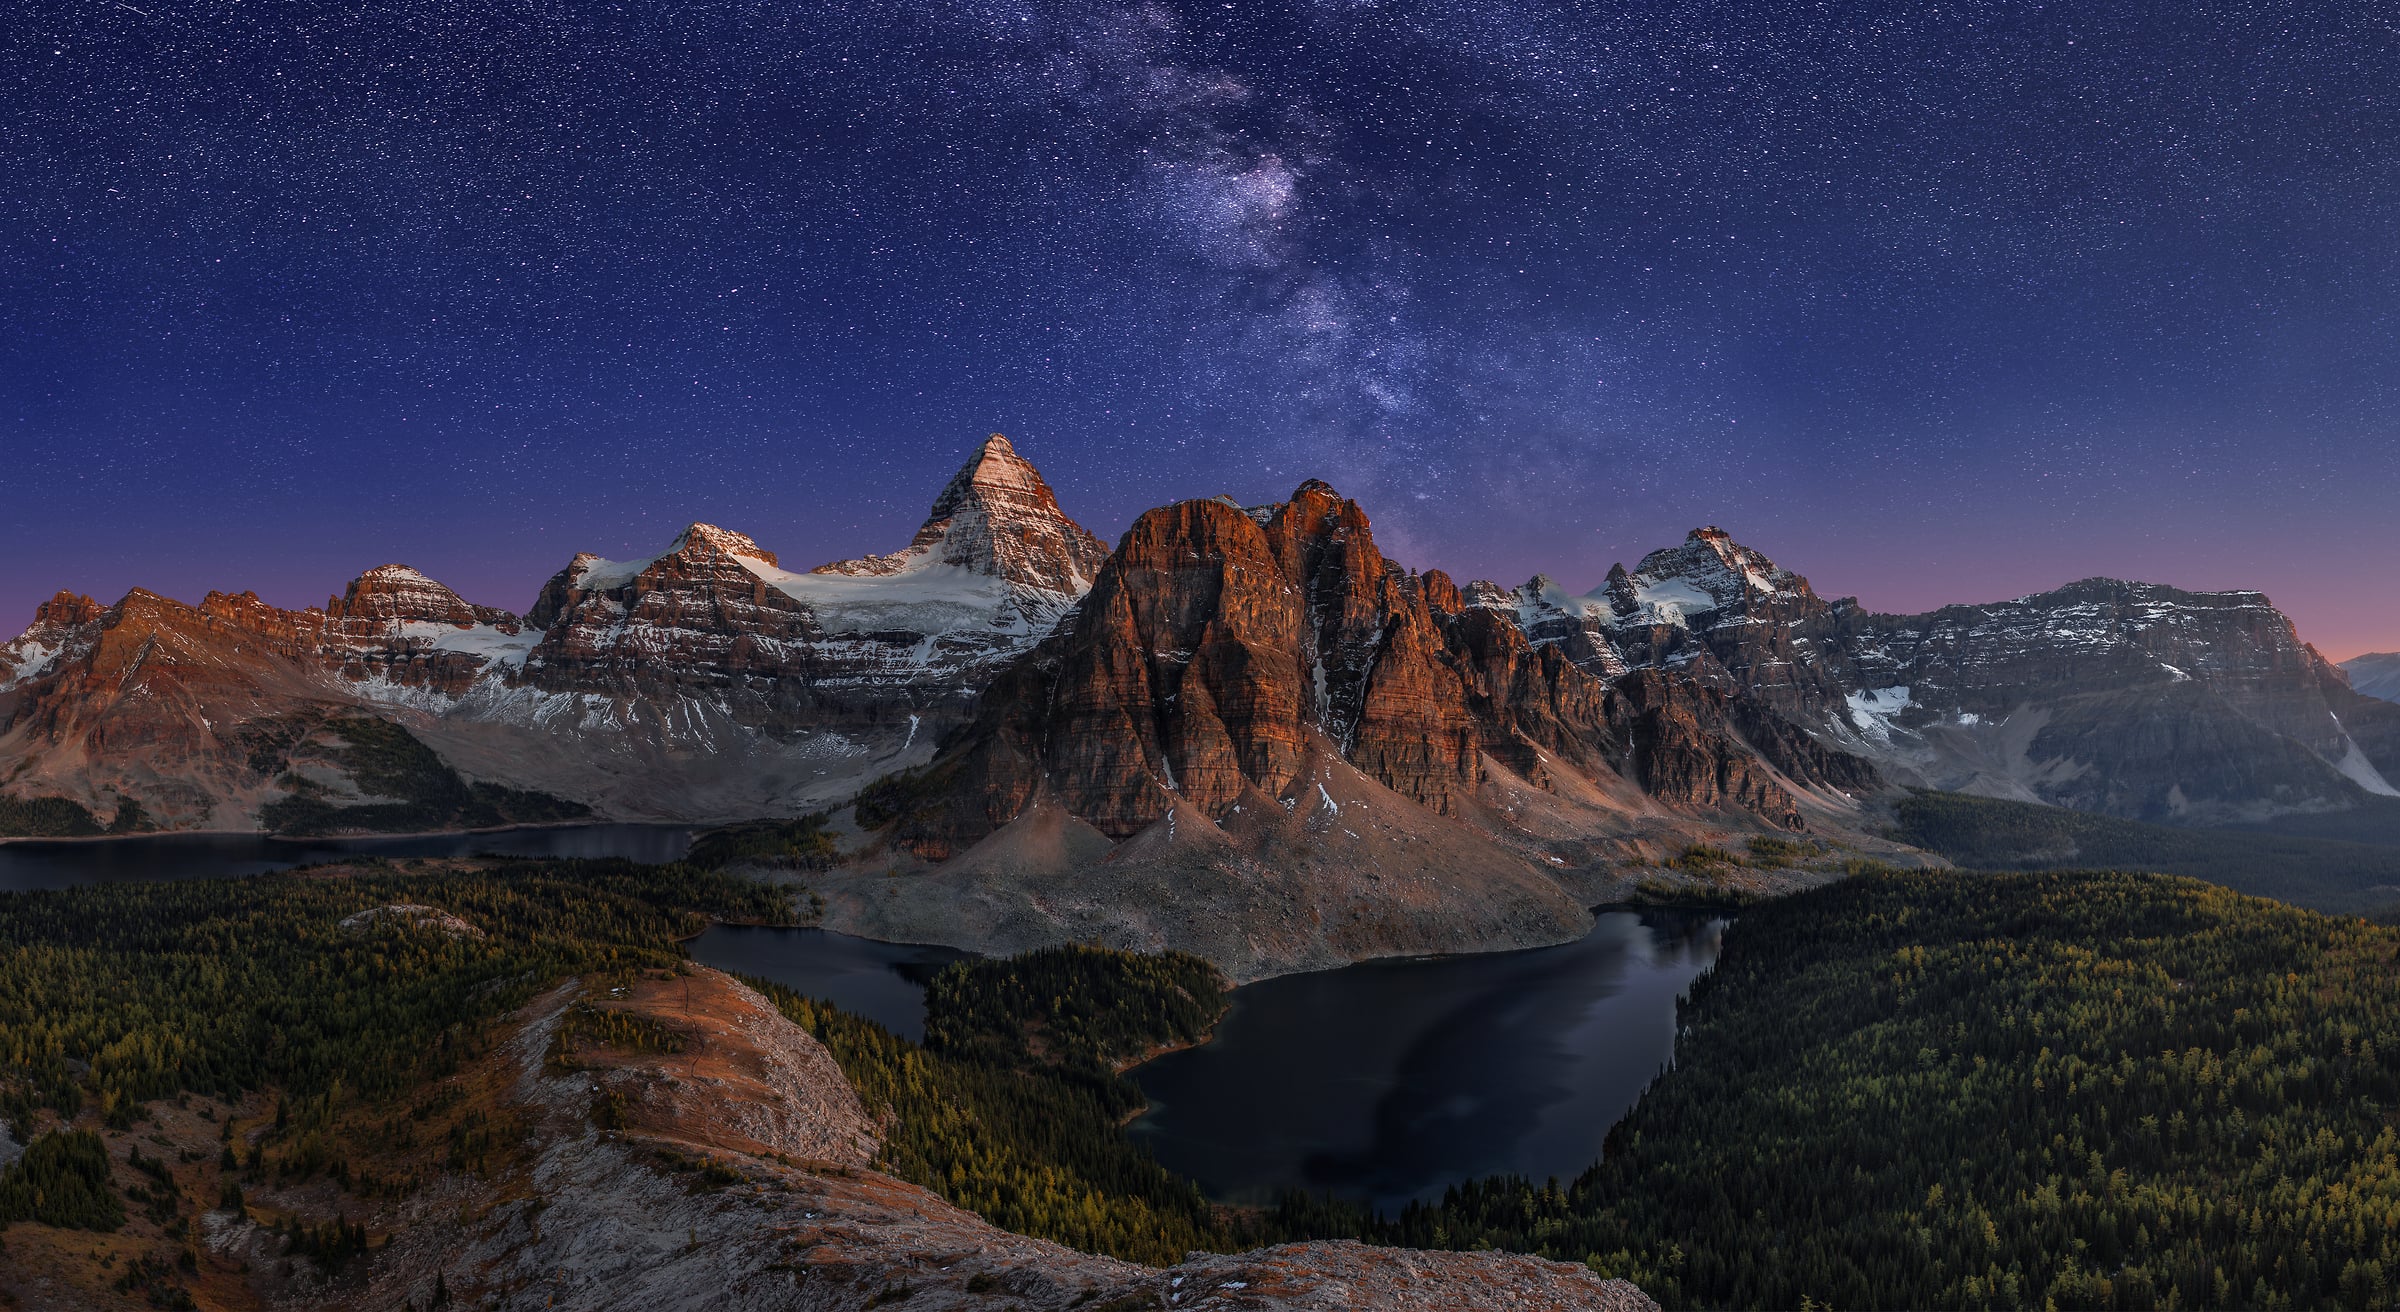 157 megapixels! A very high resolution, large-format VAST photo print of mountains, lakes, the milky way, stars, and Mount Assiniboine; fine art landscape photo created by Chris Collacott in Assiniboine Provinical Park, British Columbia, Canada.